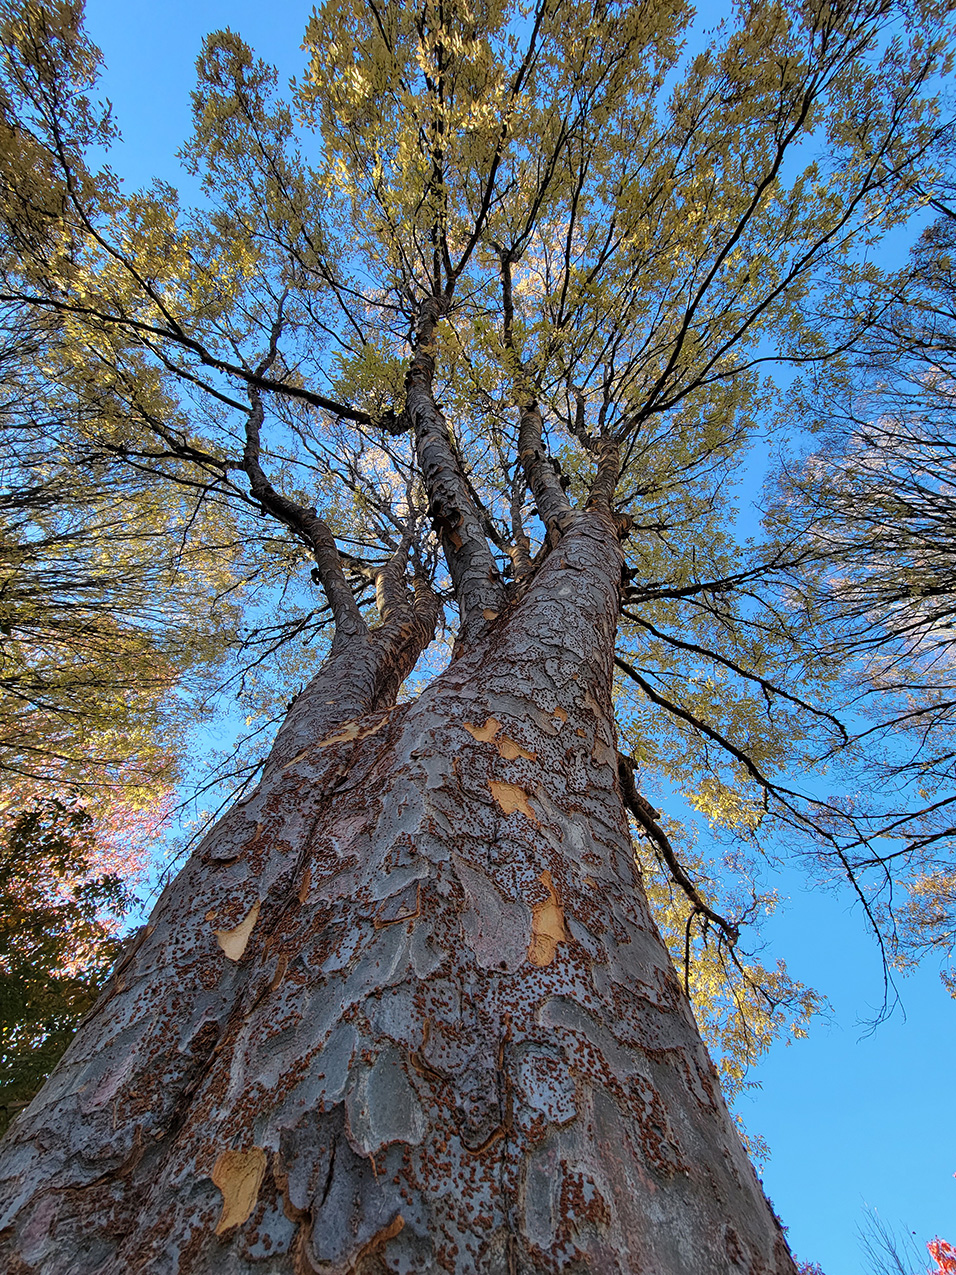 photo of two conjoined trees shot from a very low perspective; the bark is scaly and blue-gray with rust-colored dots/ the foliage is sparse and the sky is bright blue